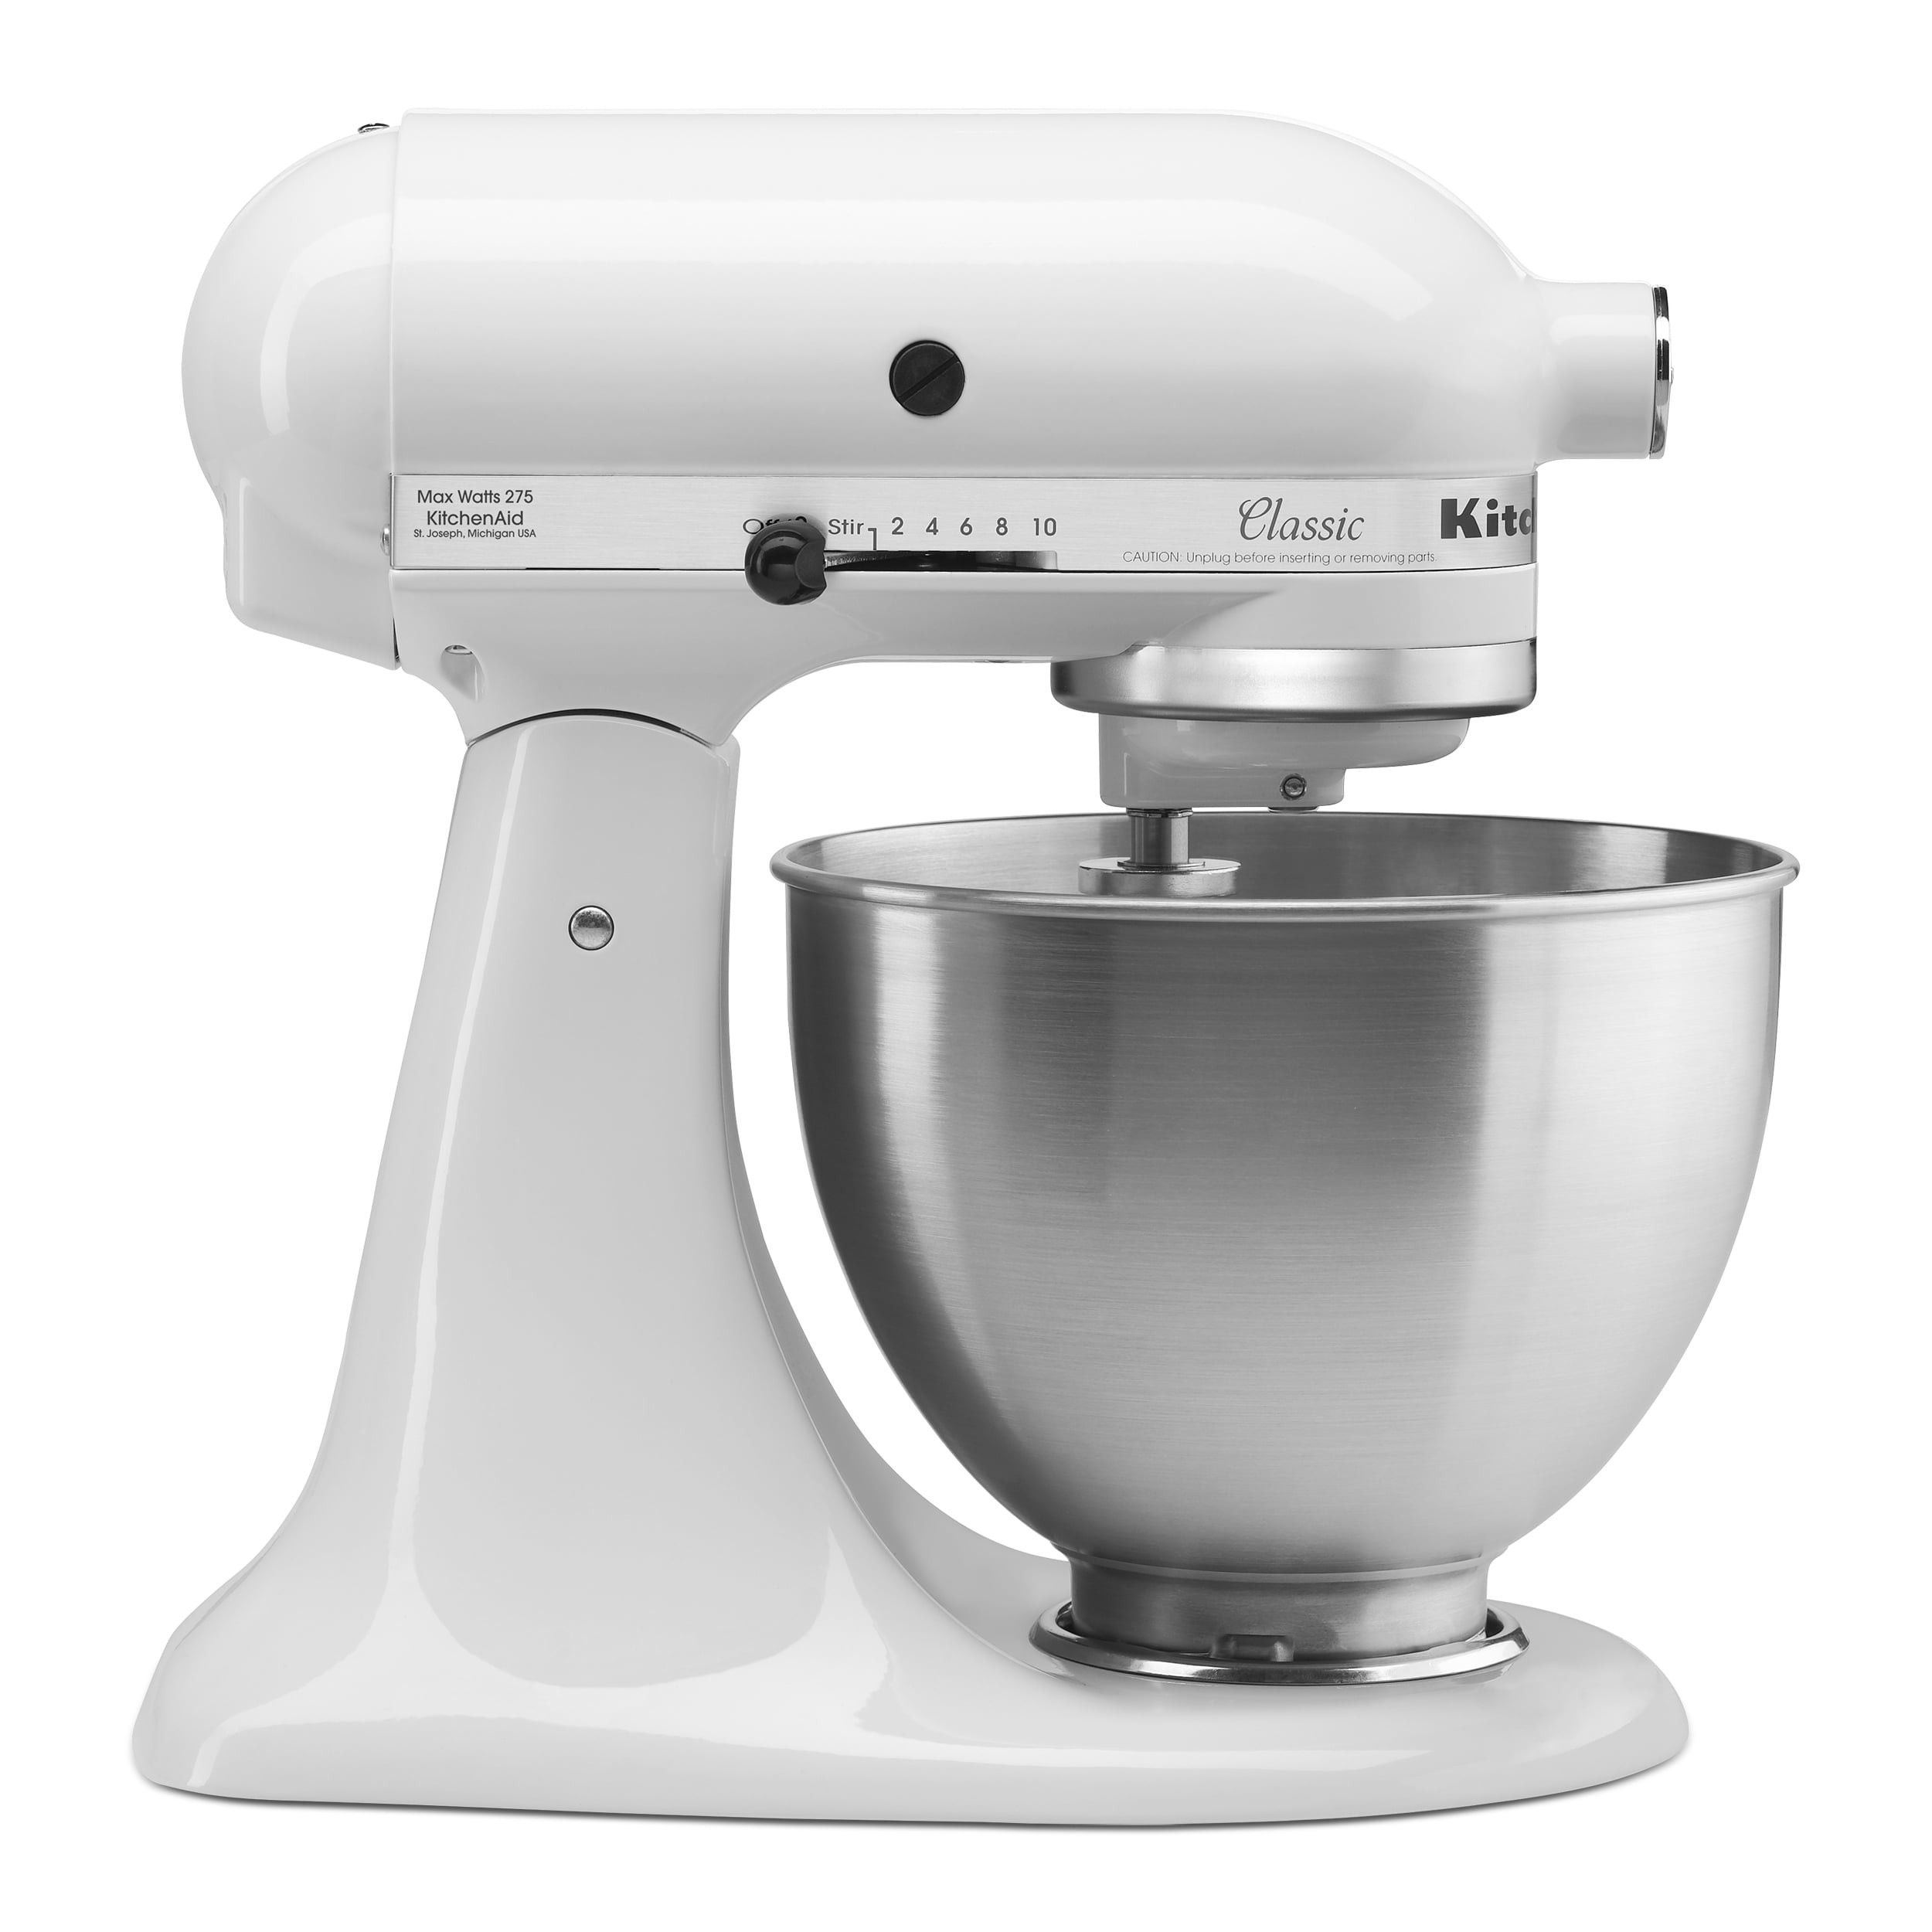 Wadoy K45B Beater Tilting Stand Mixer for Kitchenaid Mixer 4.5 Qt Compatible with K45 AP3884849 W10672617 